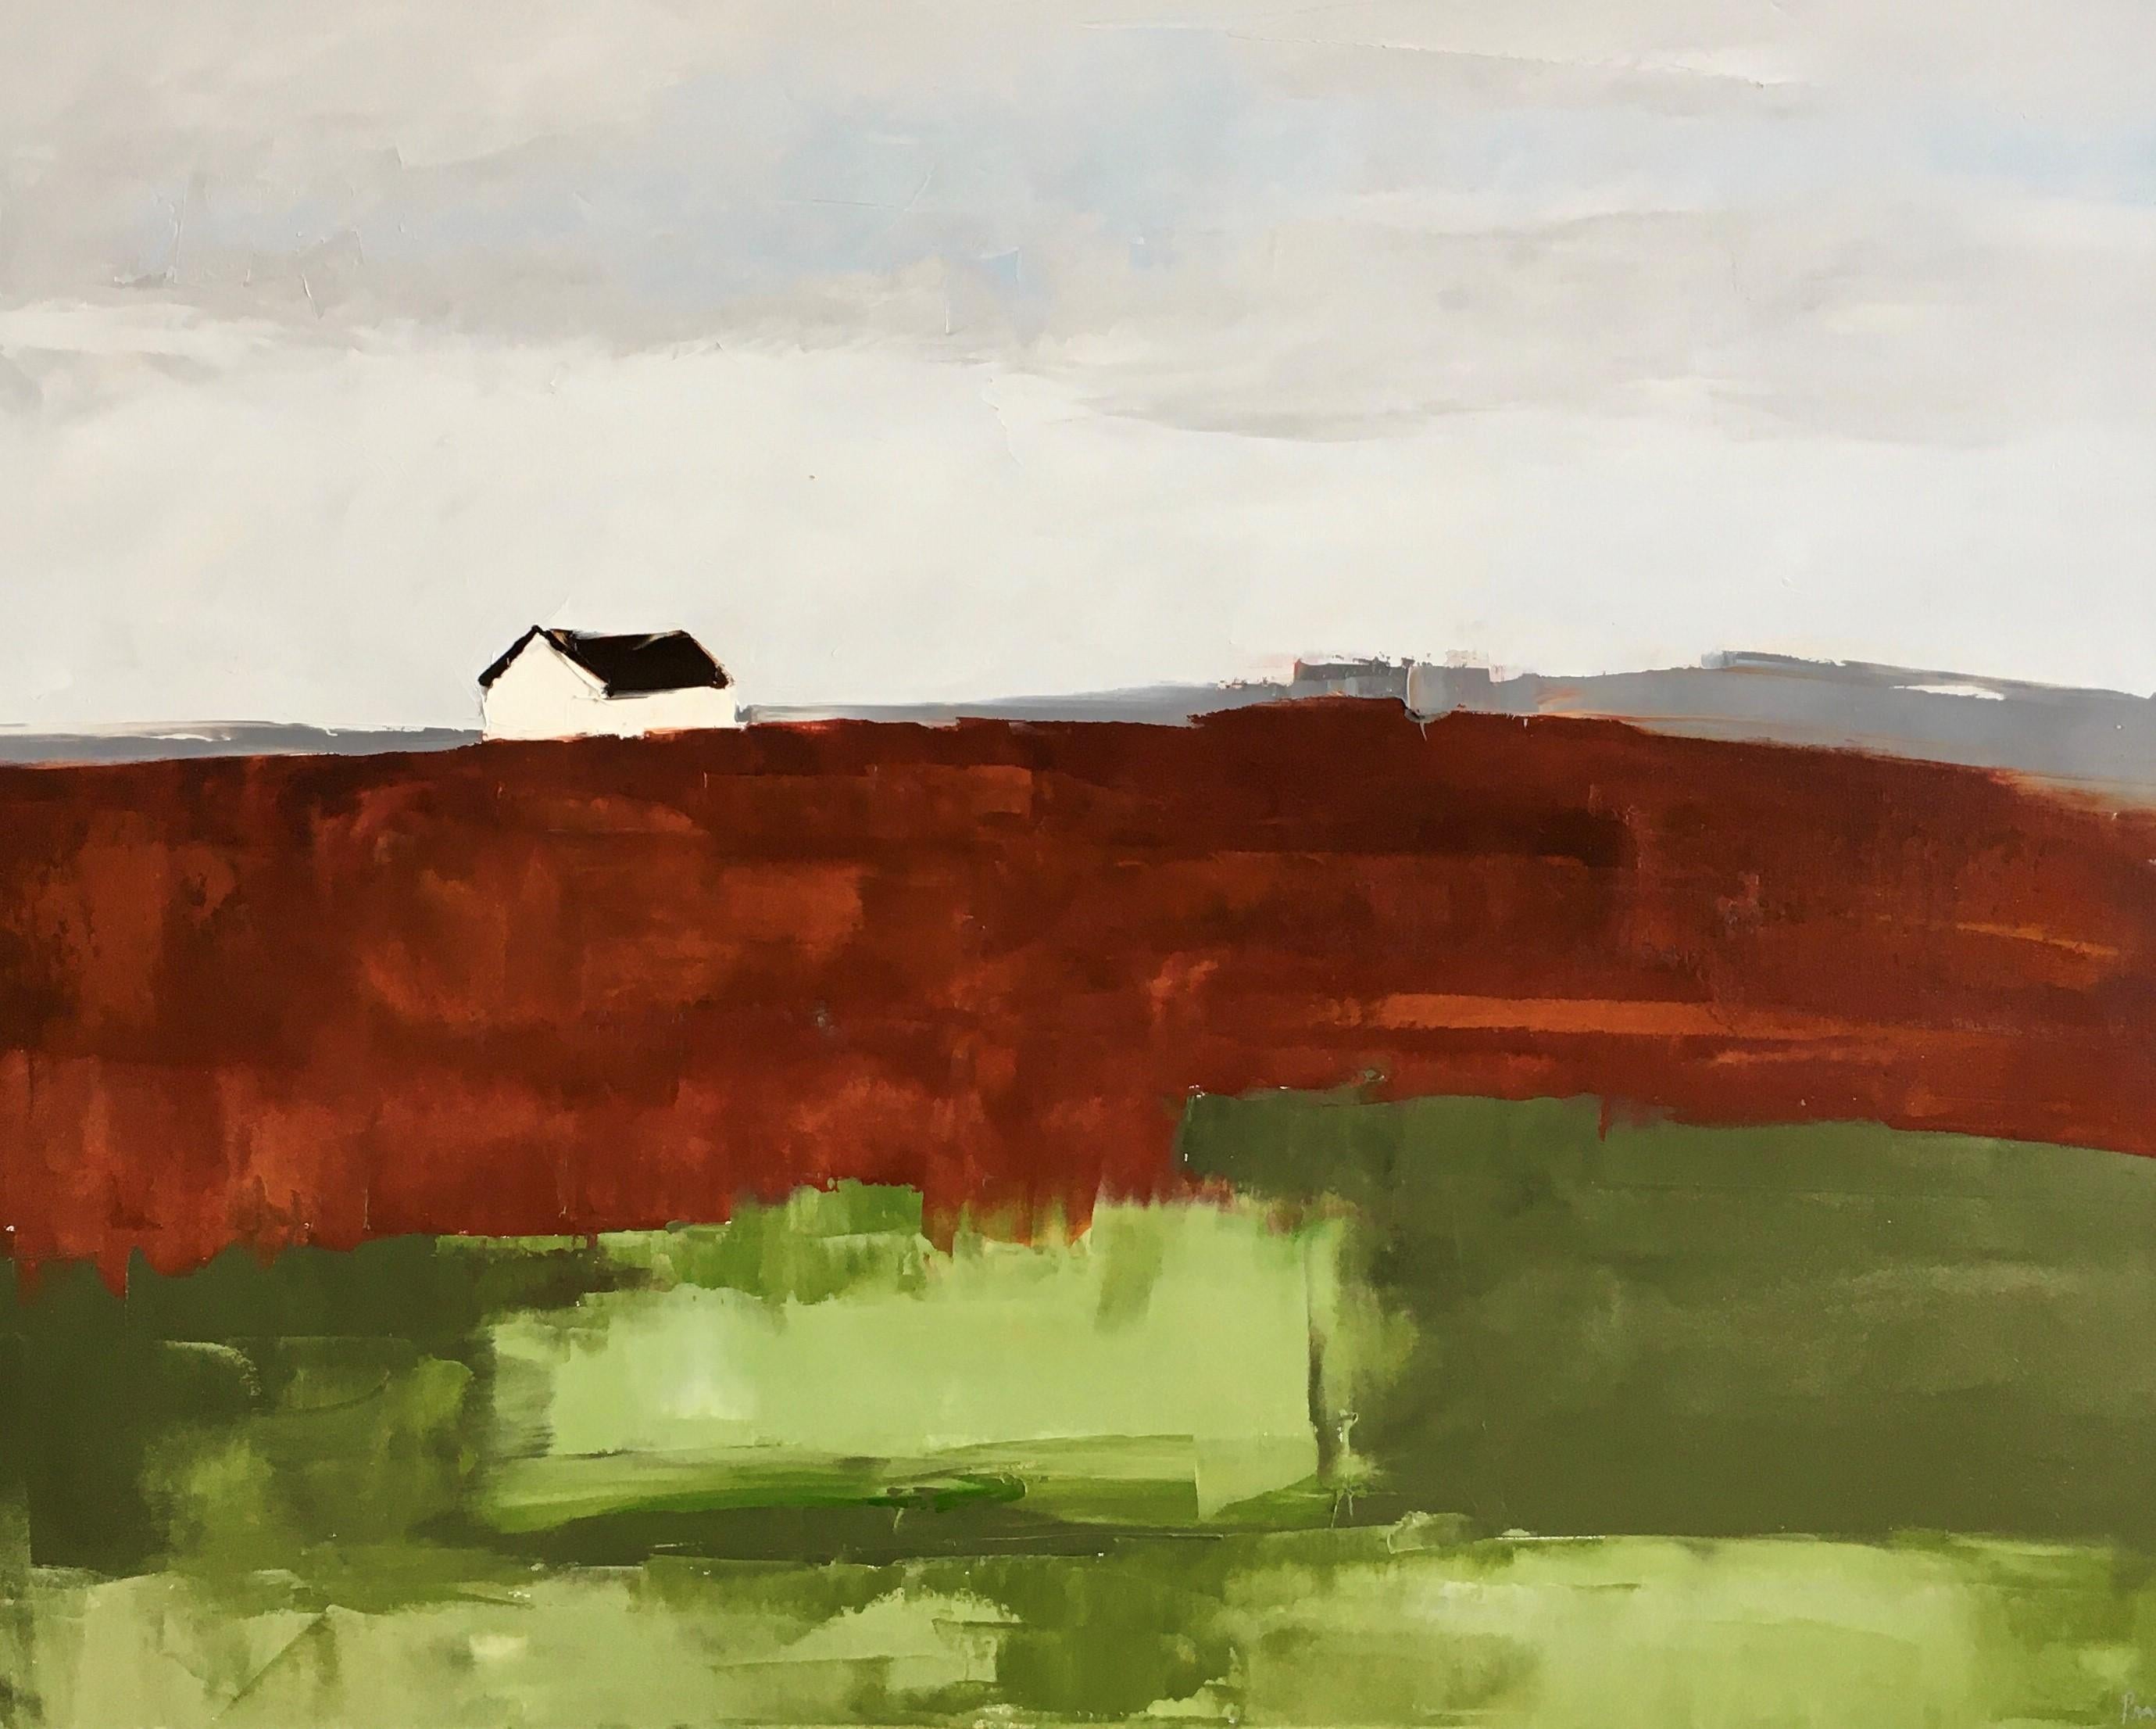 Sandra Pratt Landscape Painting - "Red and Green Field", Oil painting